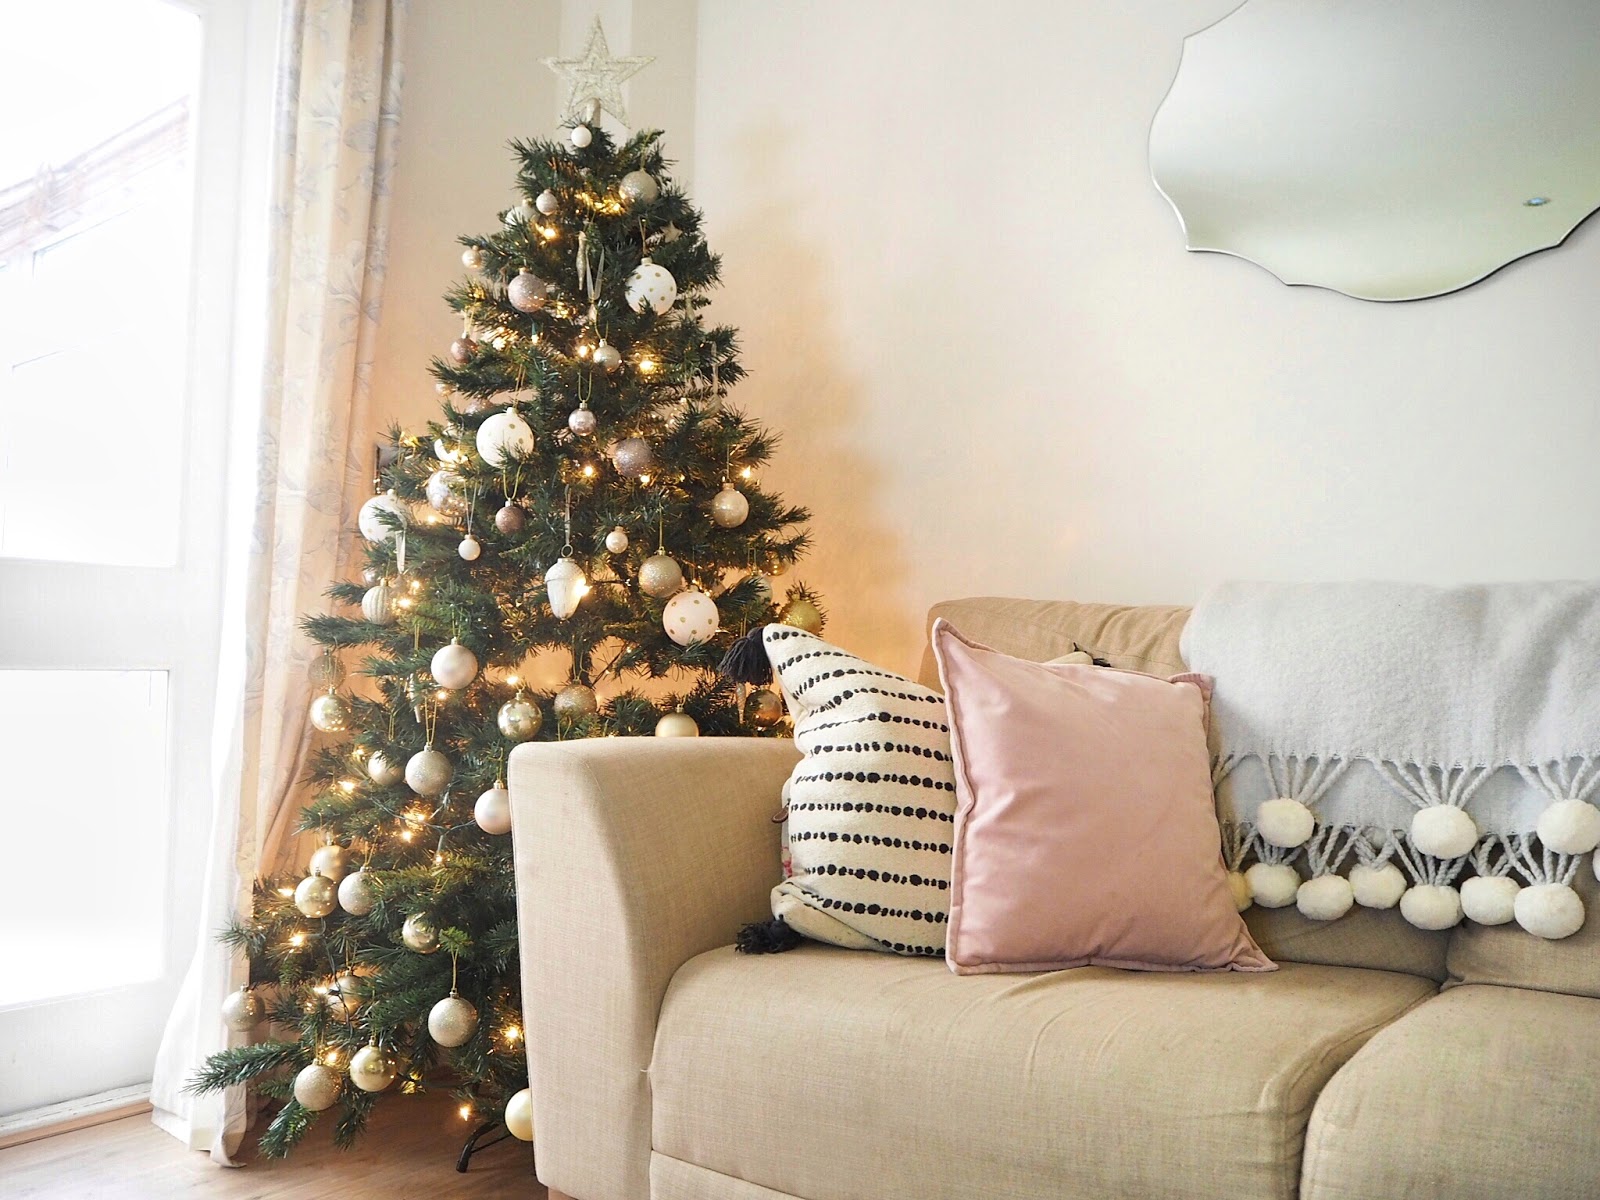 Christmas Home Decor In Gold And White Featuring Baubles - Christmas Ornament - HD Wallpaper 